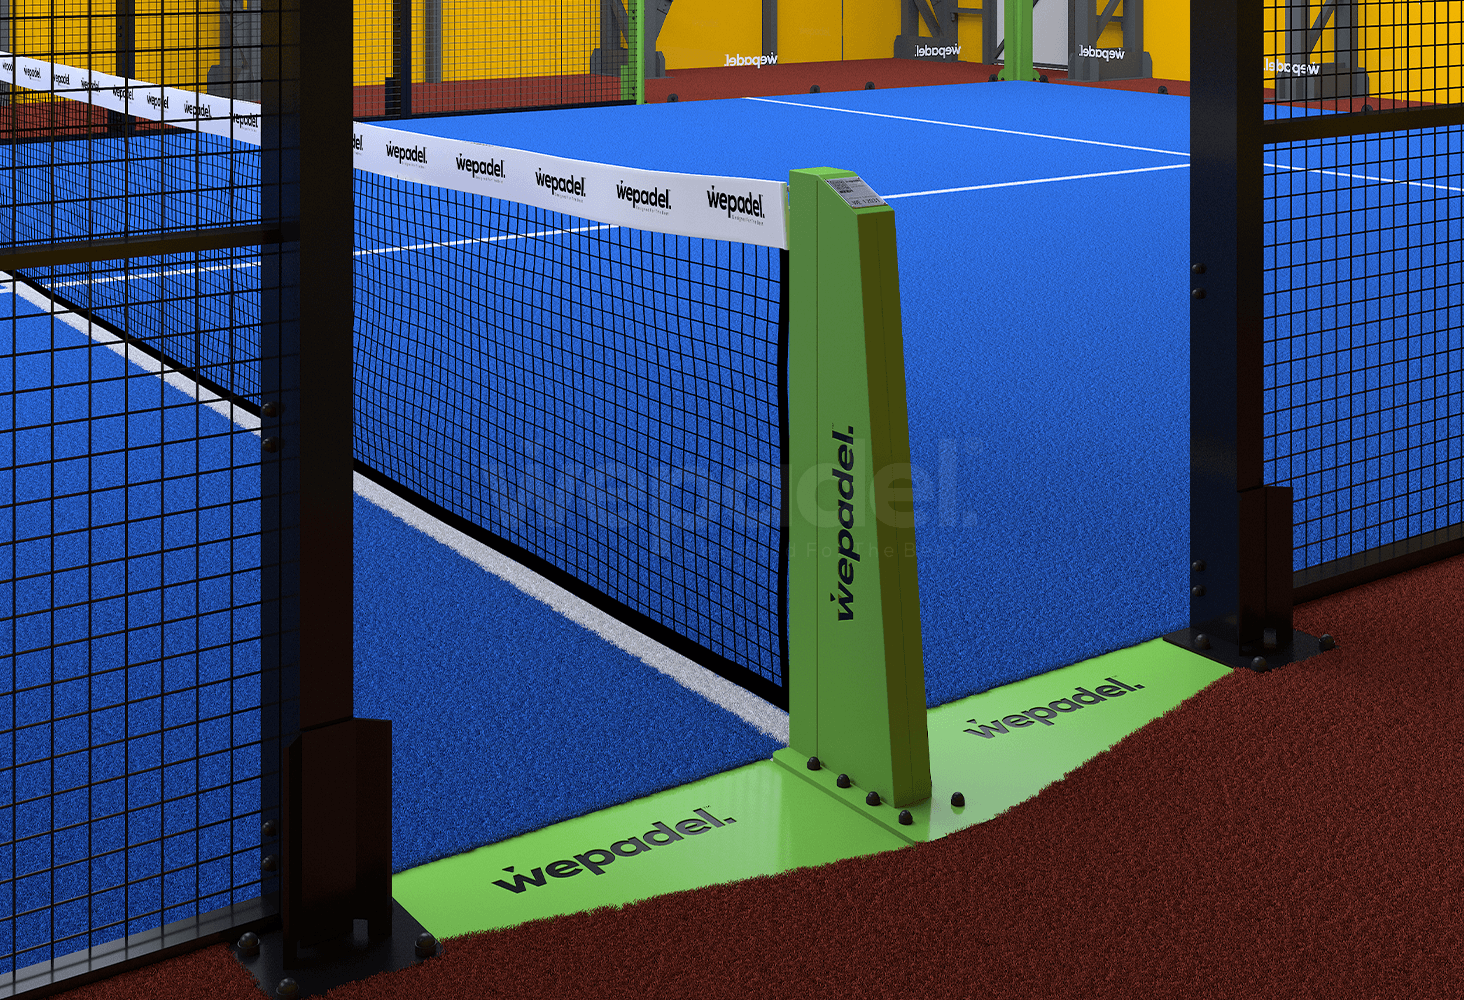 special-edition-padel-court-5